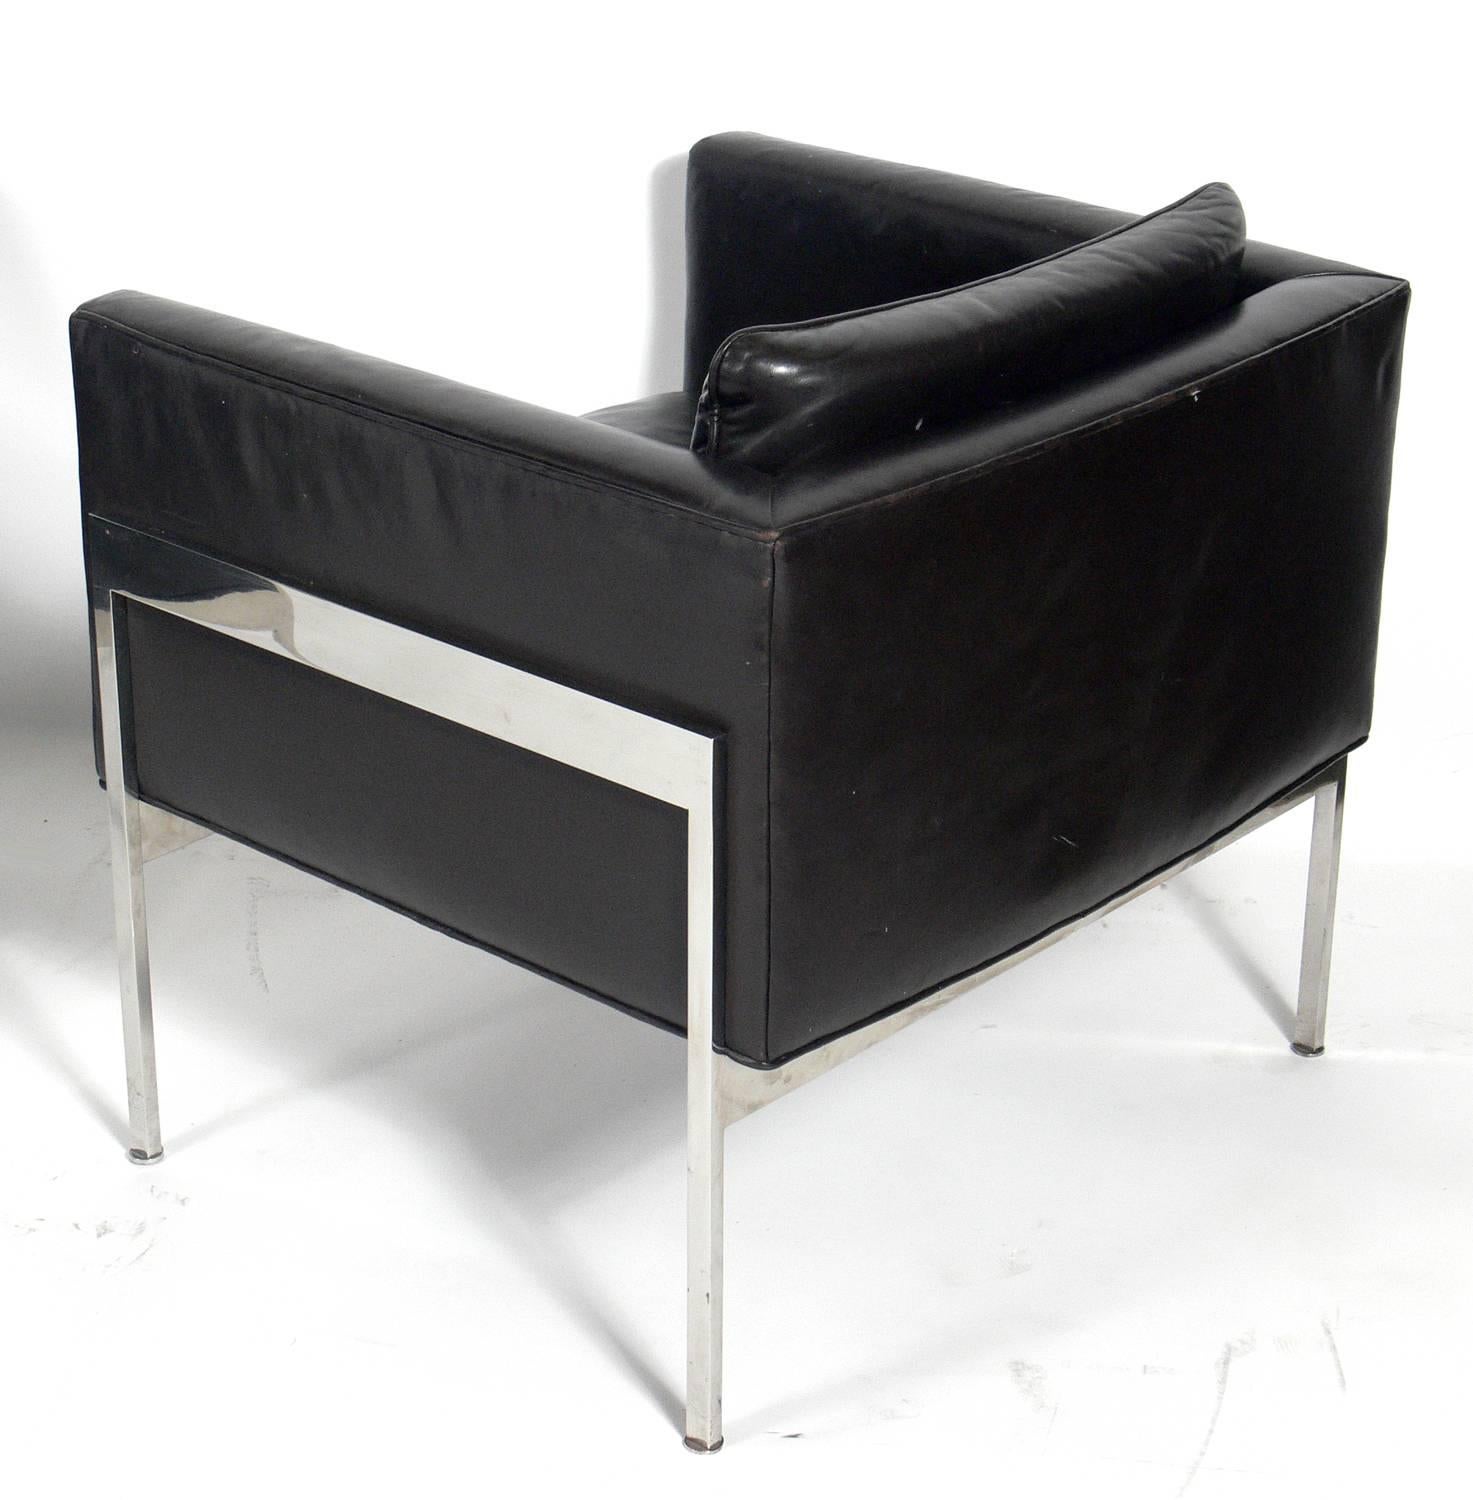 American Pair of Chrome and Leather Cube Chairs Attributed to Harvey Probber